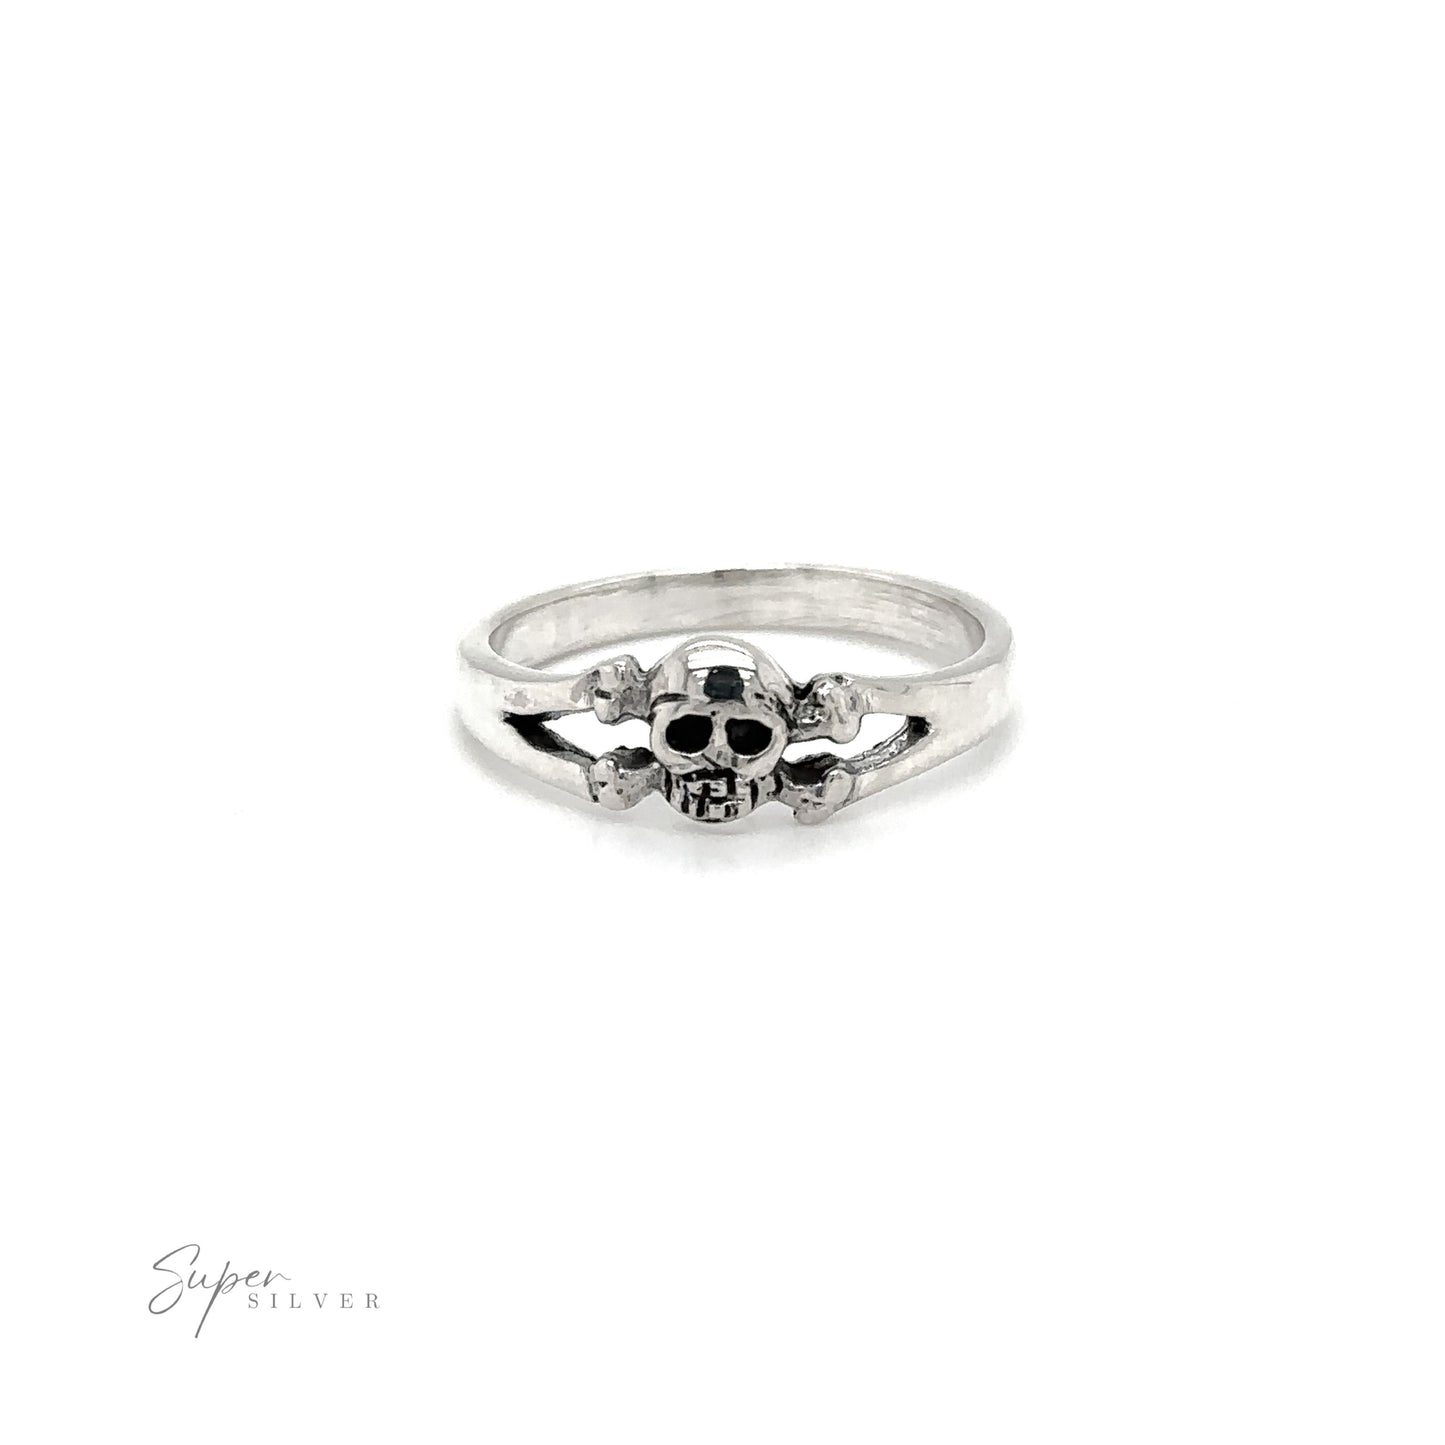 A rebellious Cute Skull and Crossbones Ring made of sterling silver, perfect for those seeking an adventurous pirate-esque style.